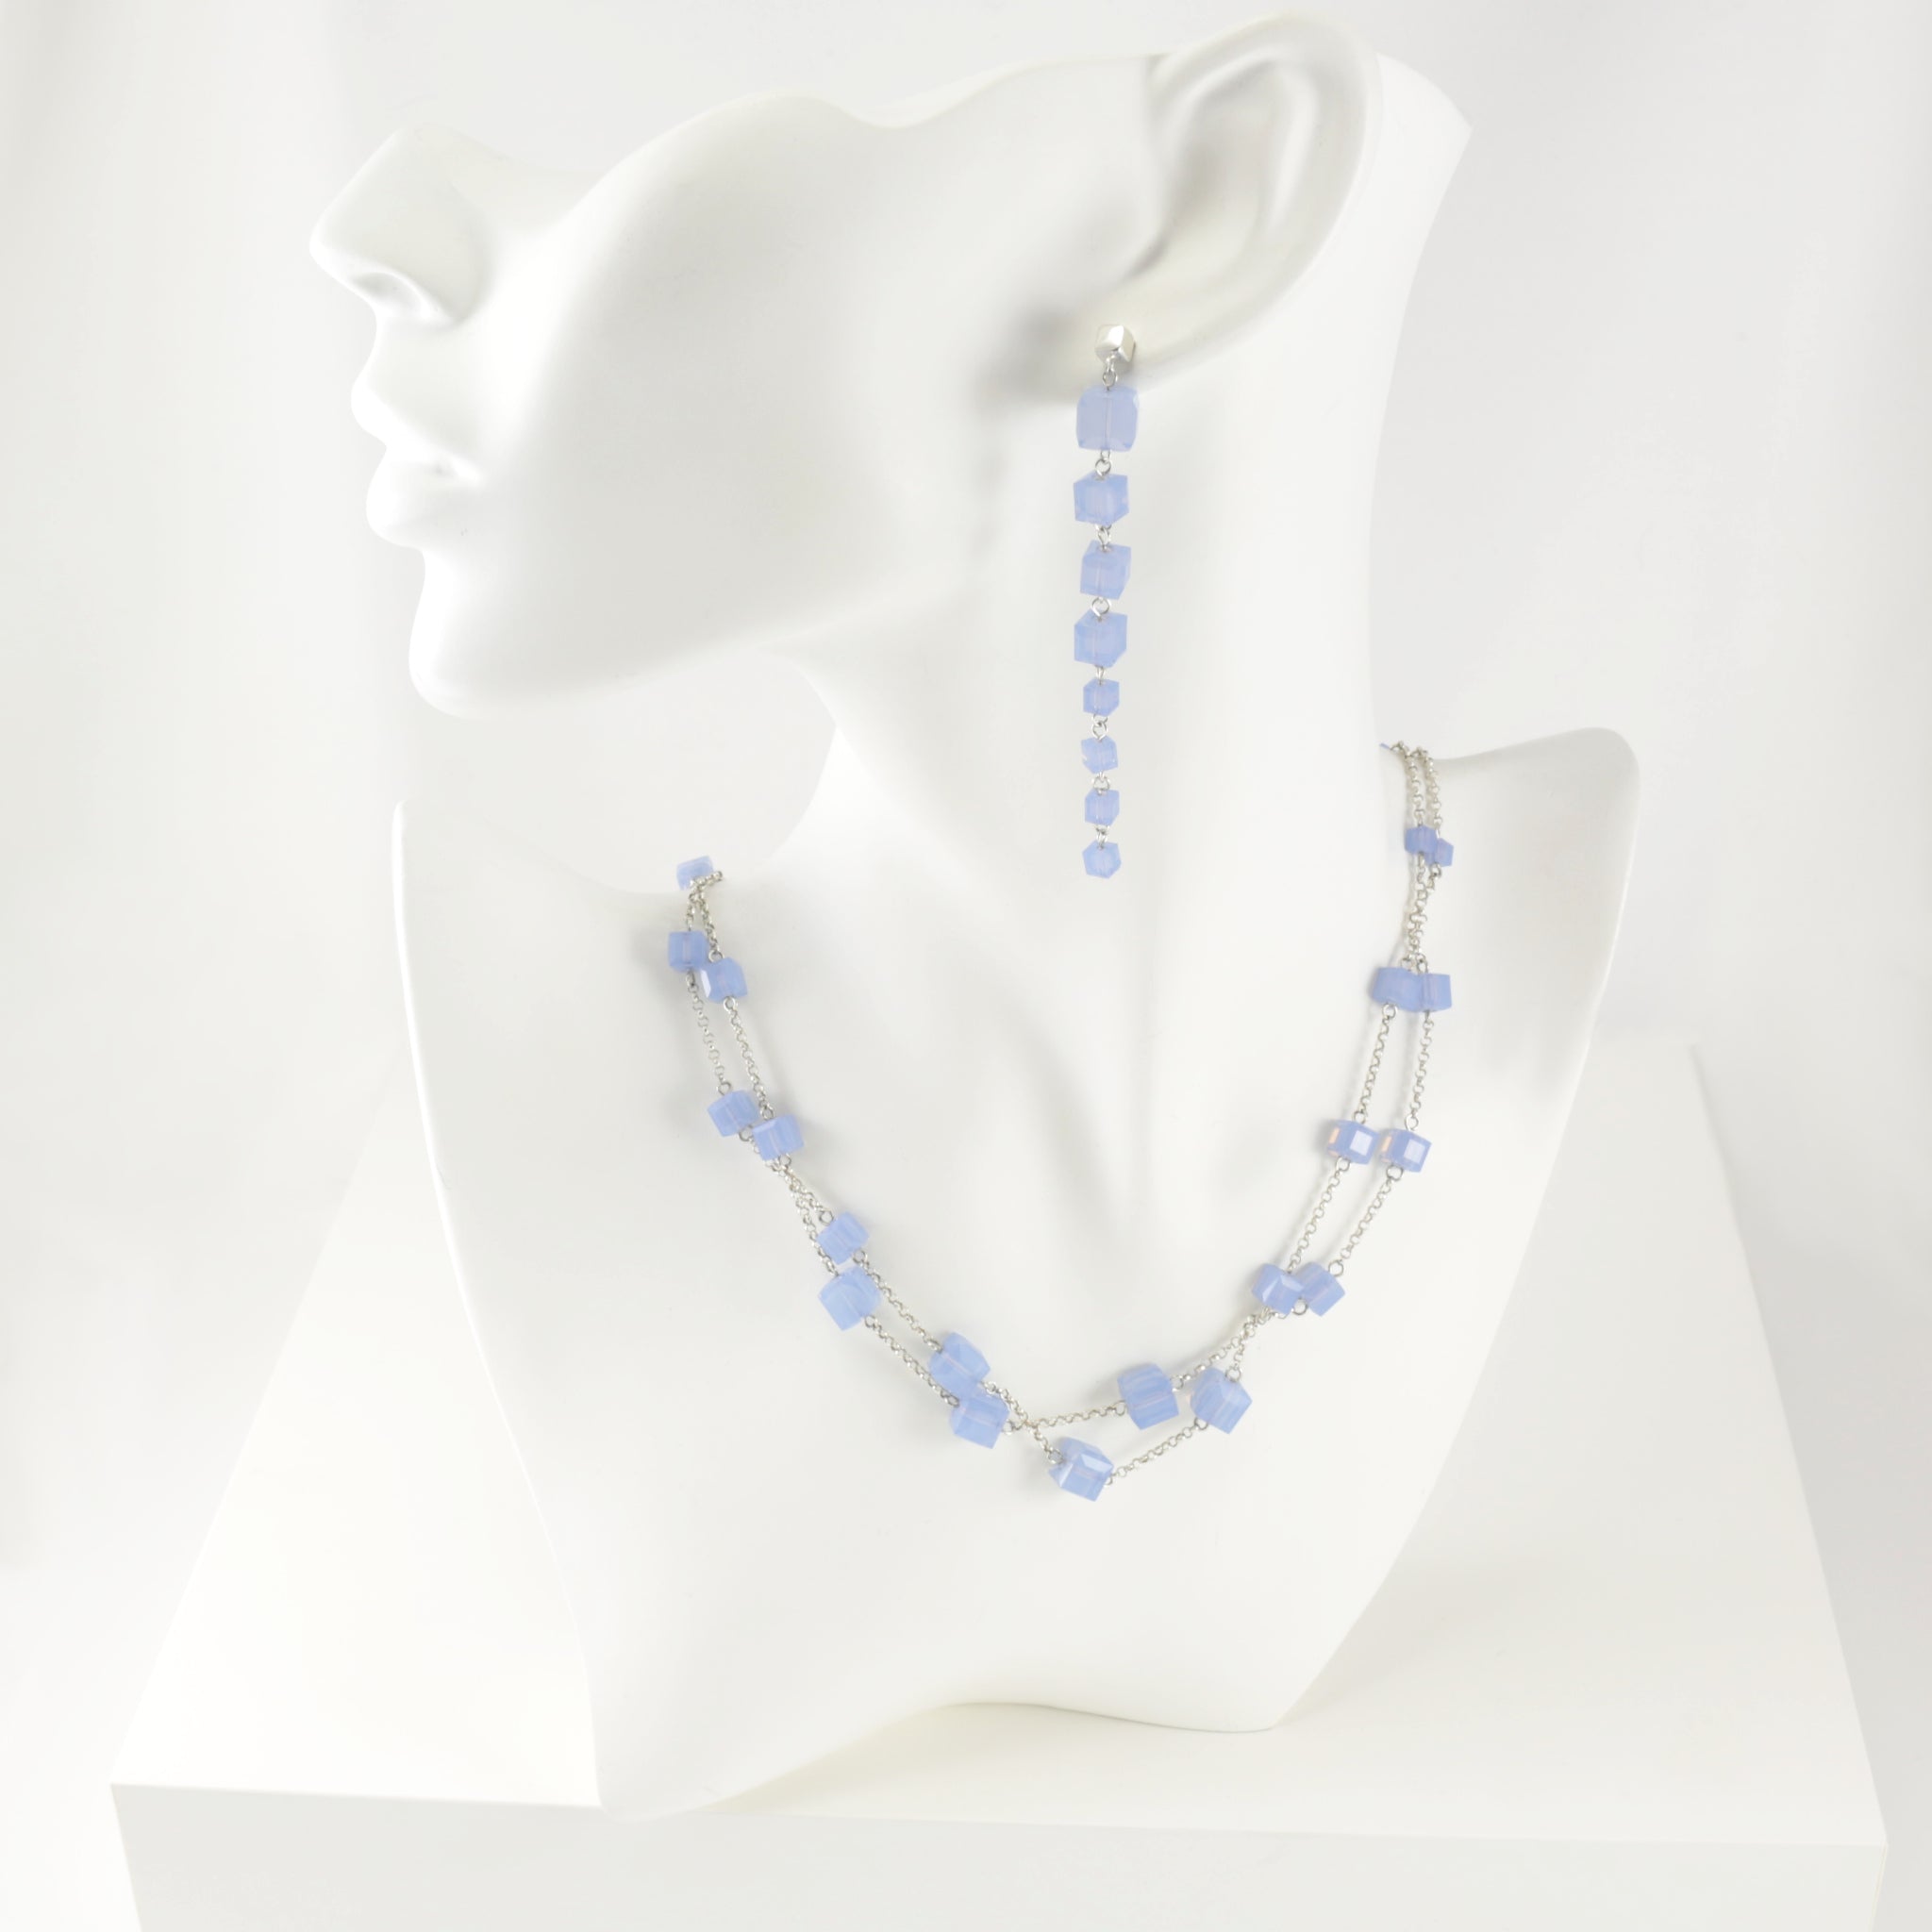 Windows Change-ABLE Necklace in Light Blue